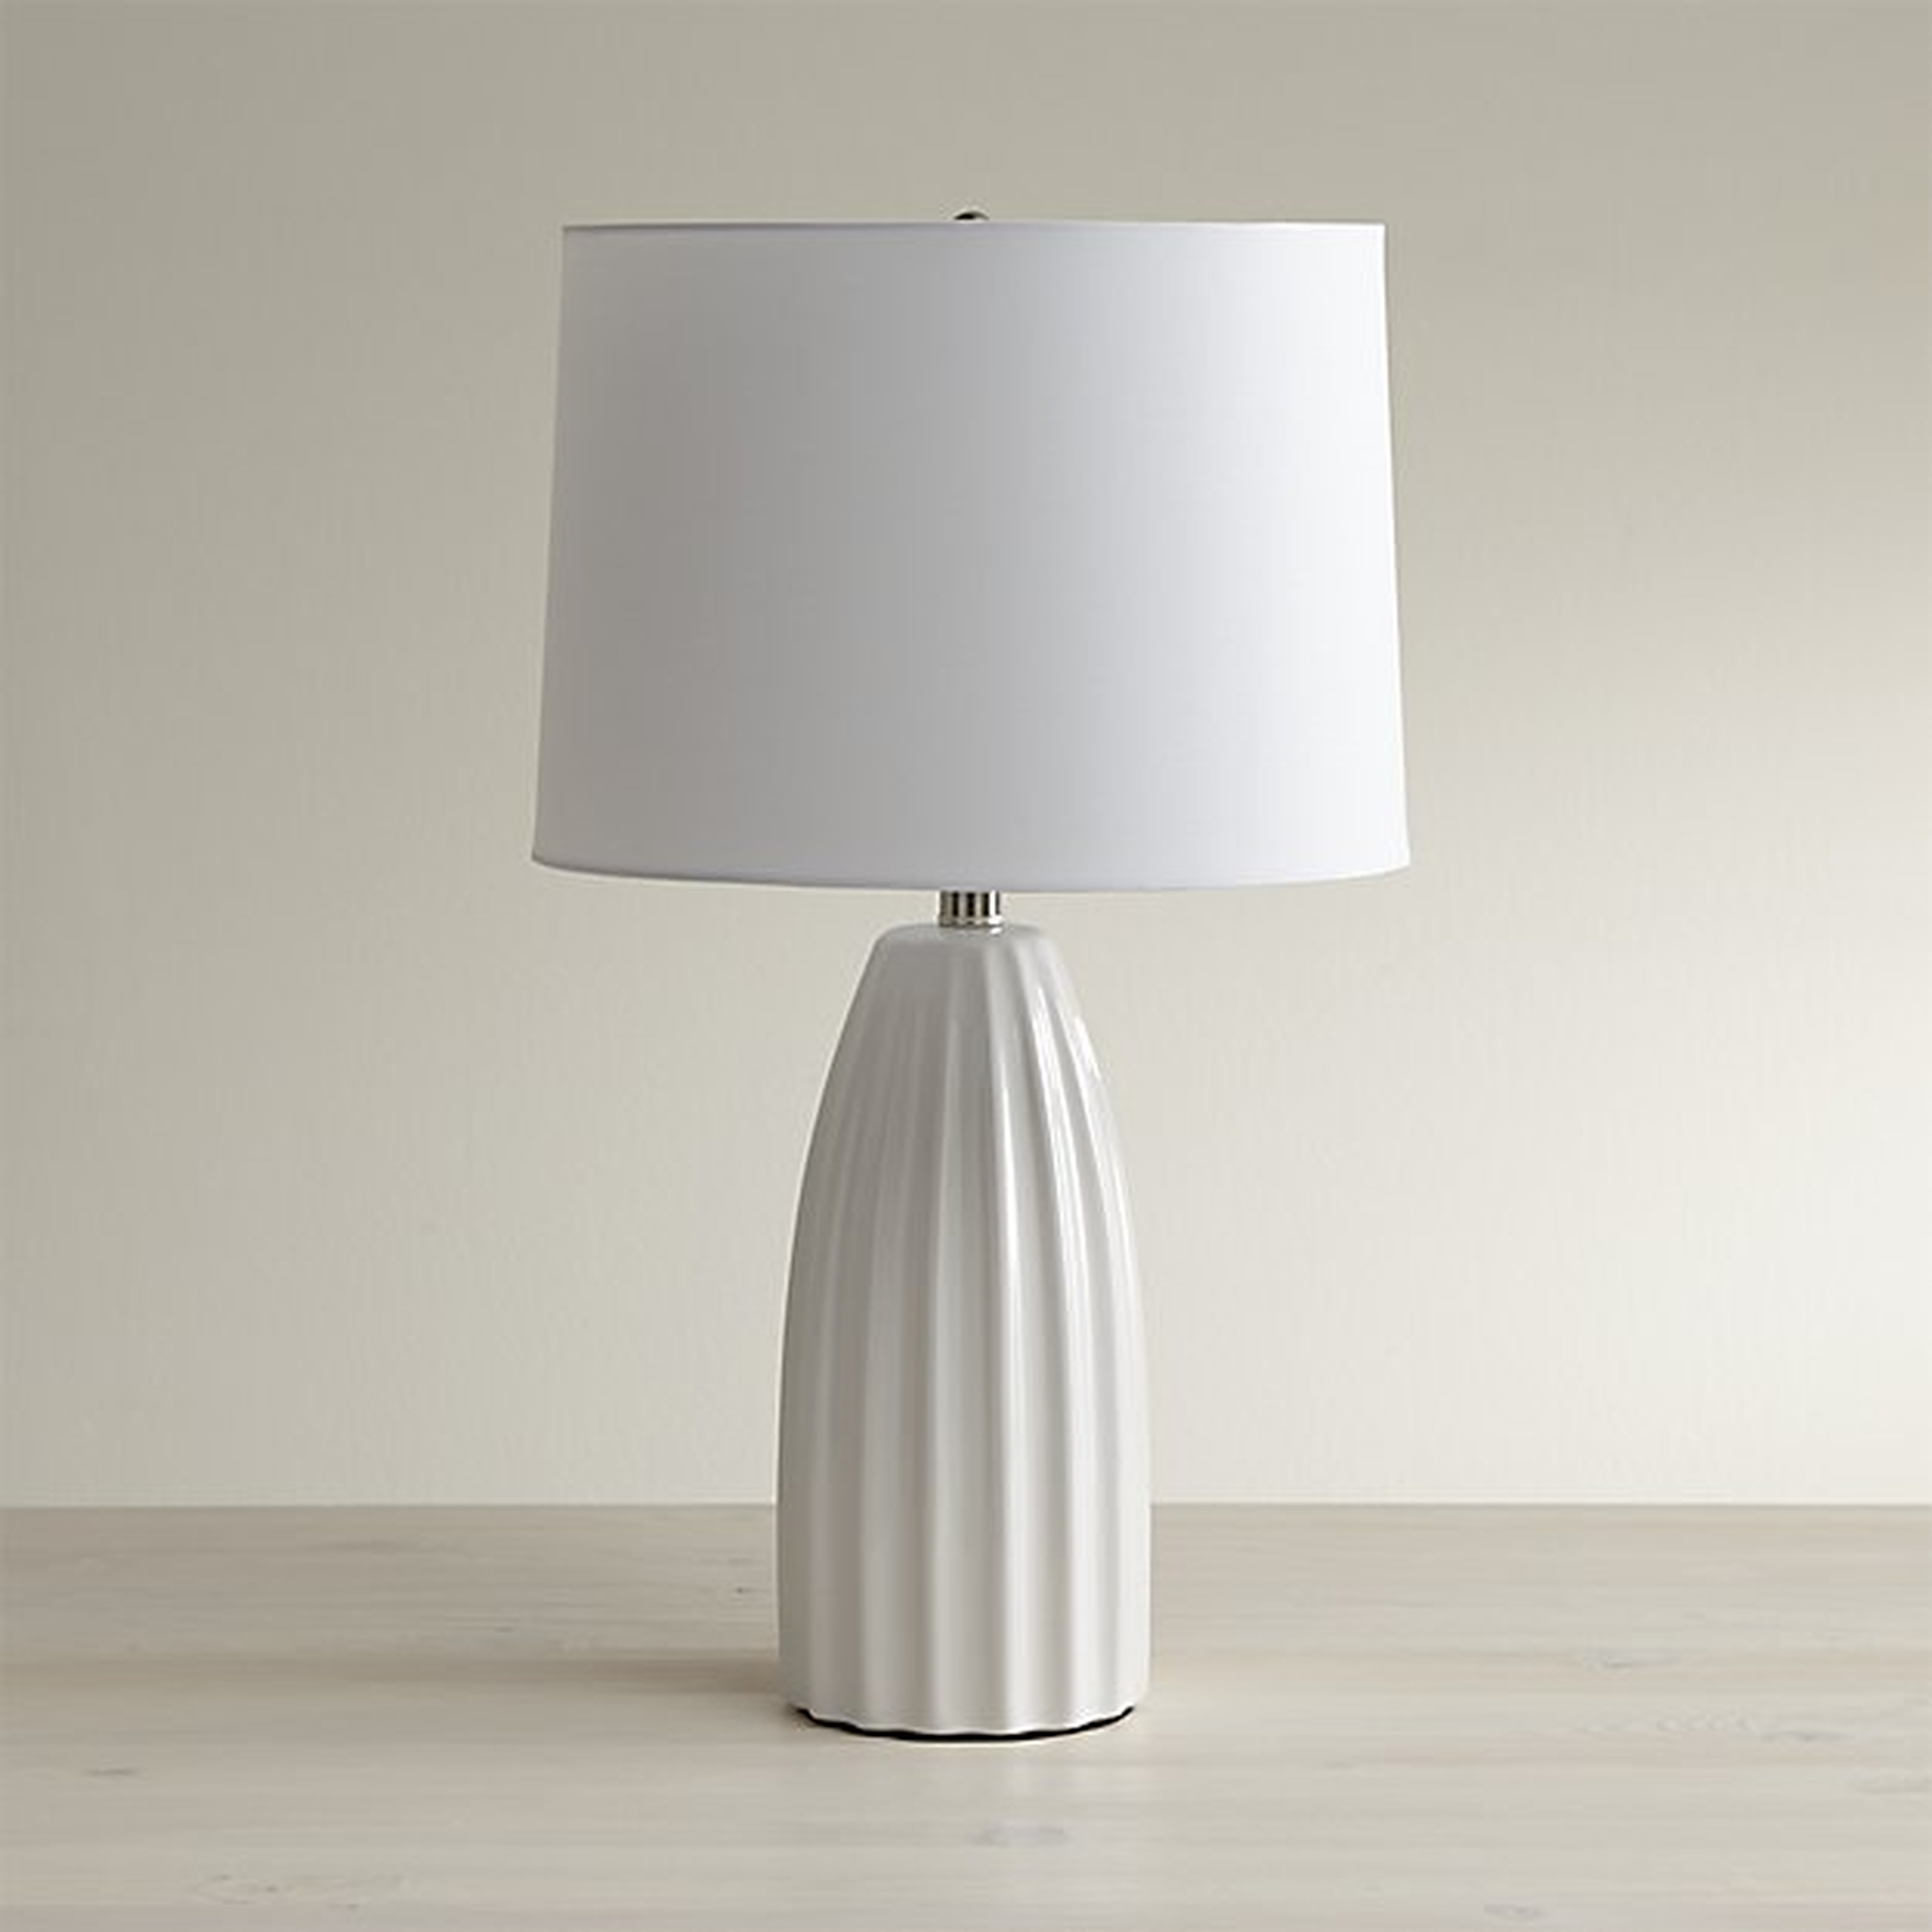 Ella Table Lamp, White, Set of 2 - Crate and Barrel